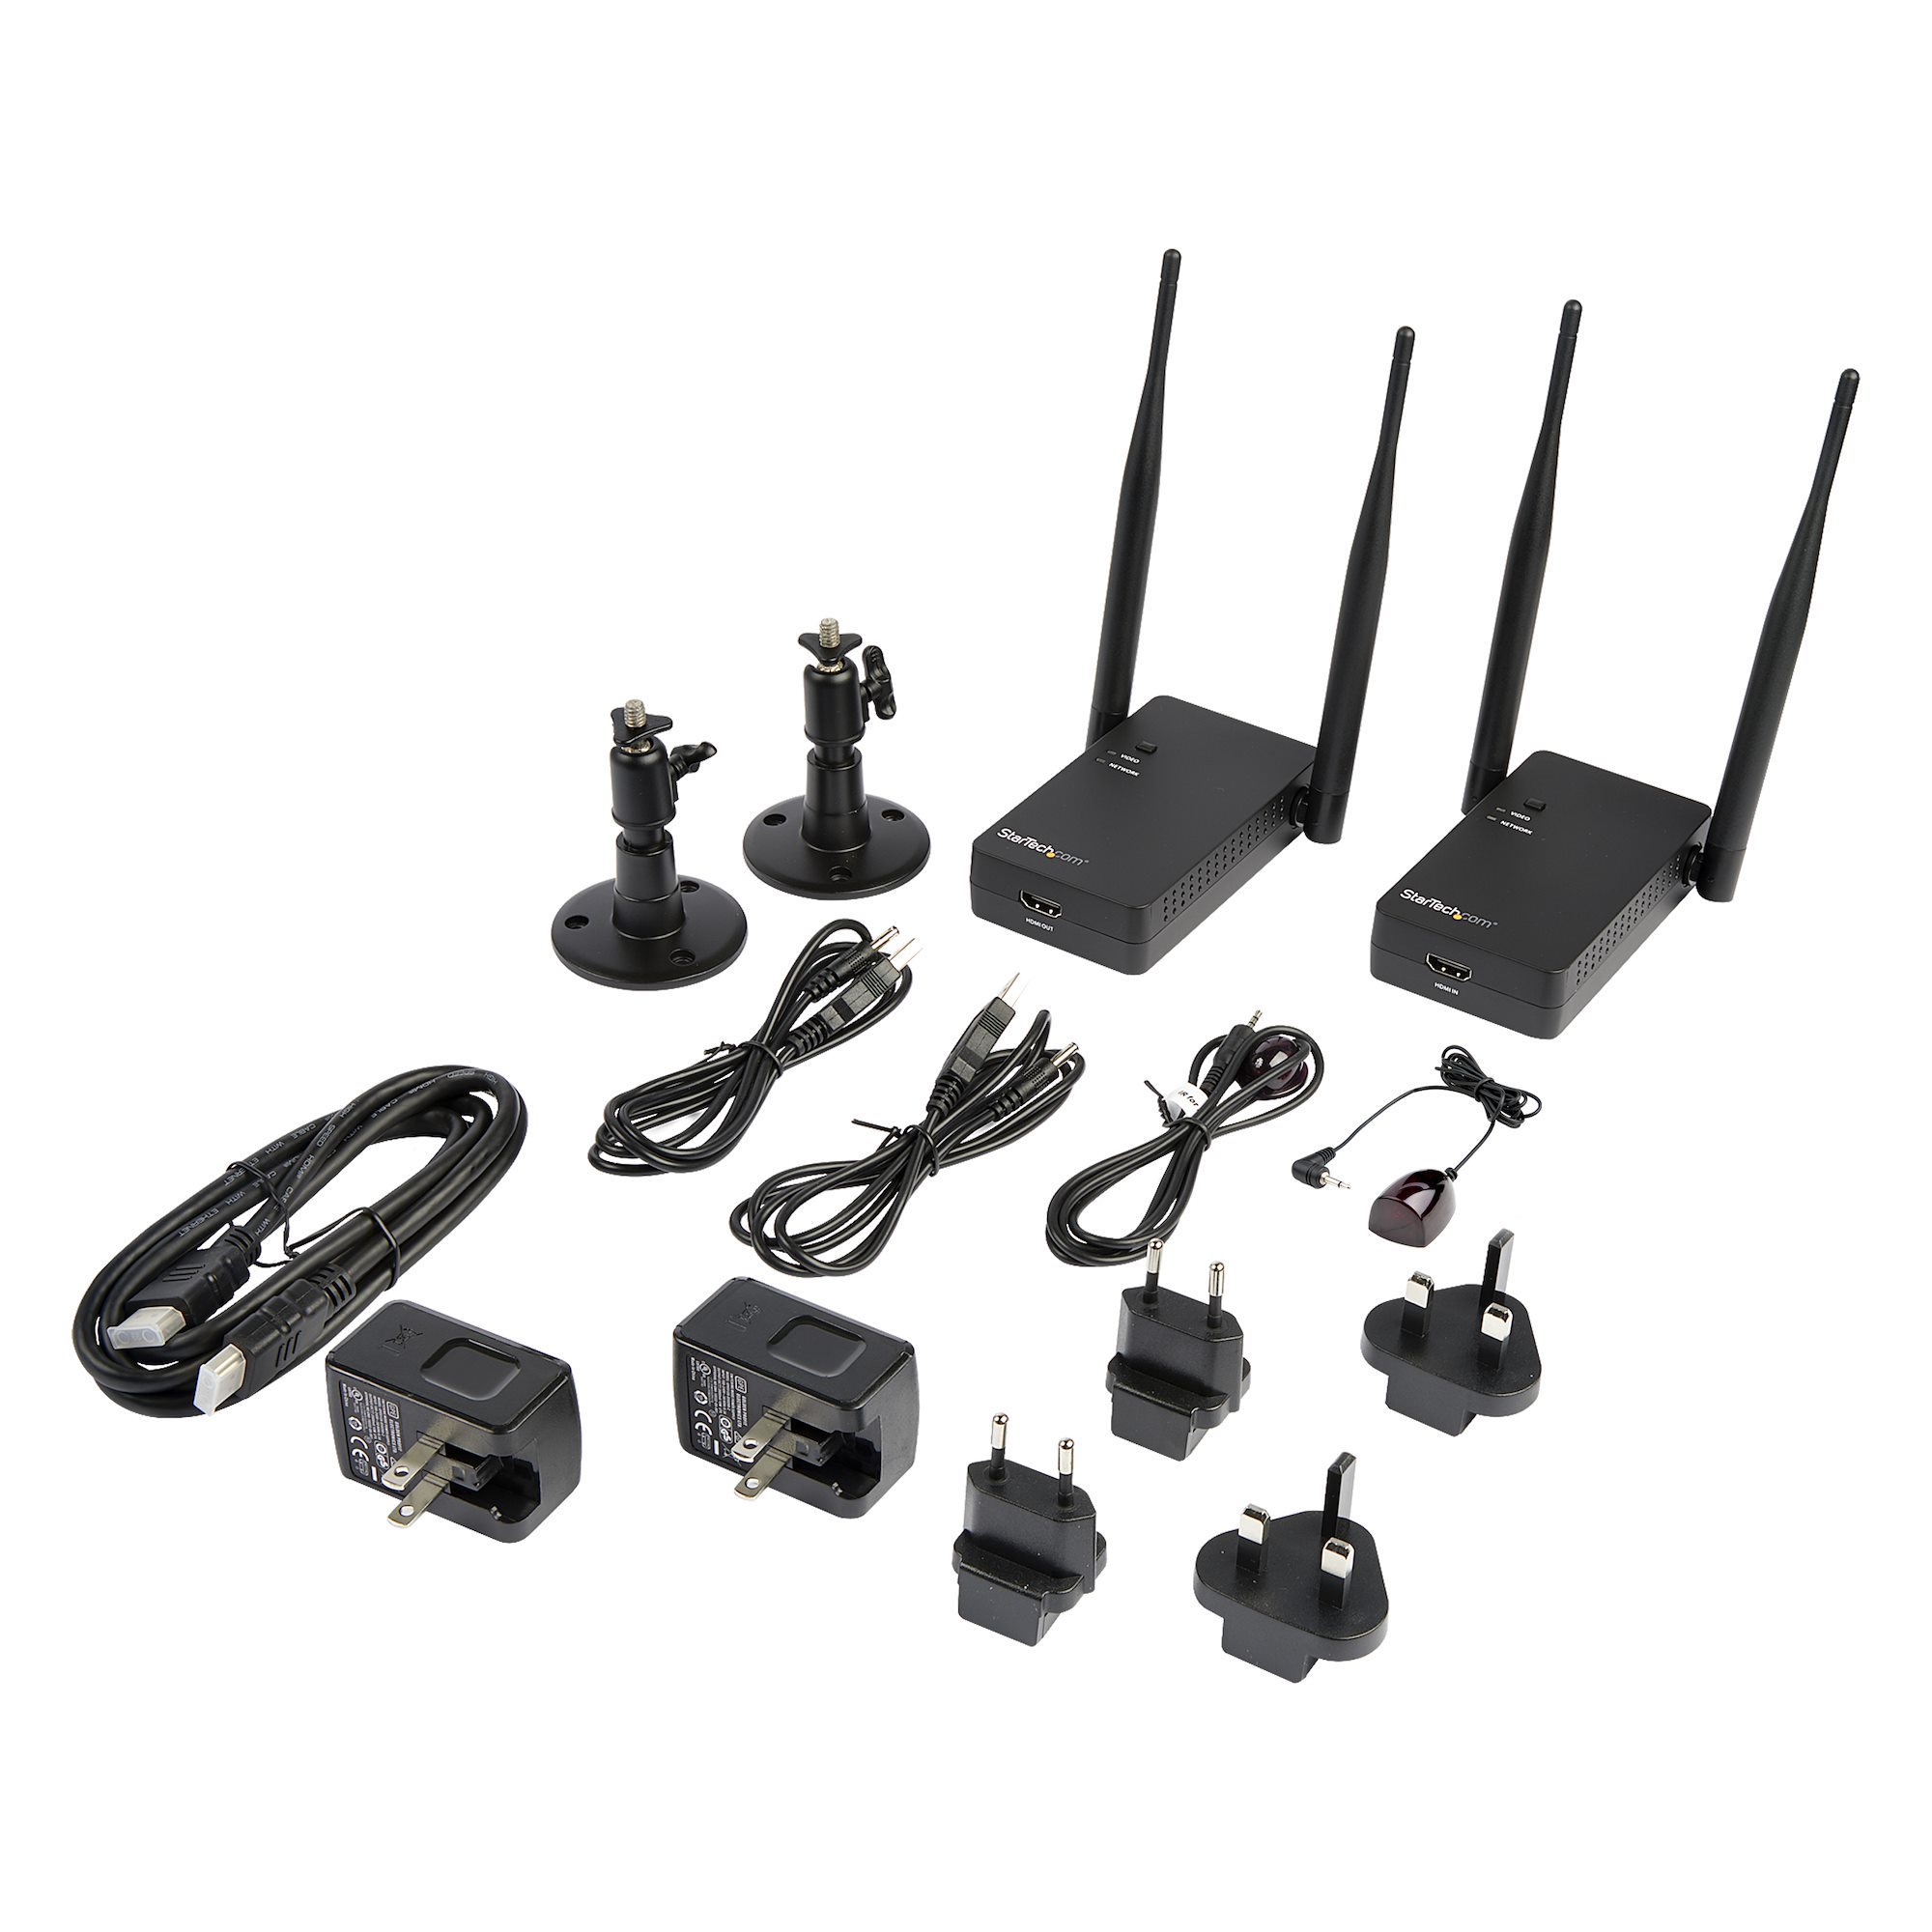 AYNCER Wireless HDMI Transmitter and Receiver，165ft